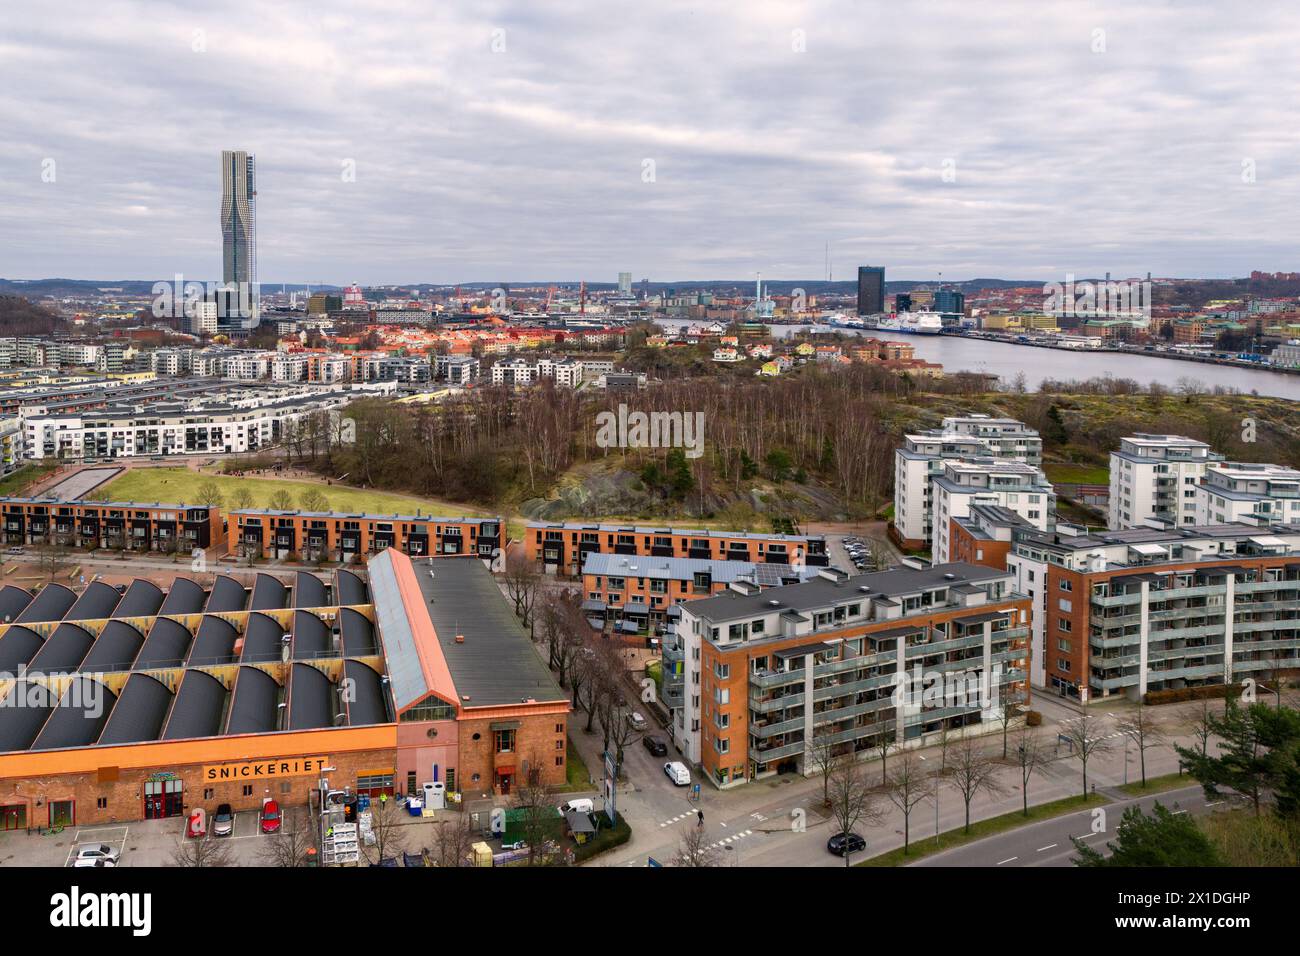 View of the tallest building in Nordic countries - Karlatornet i.e. The Karla Tower in Lindholmen, Gothenburg, Sweden Stock Photo